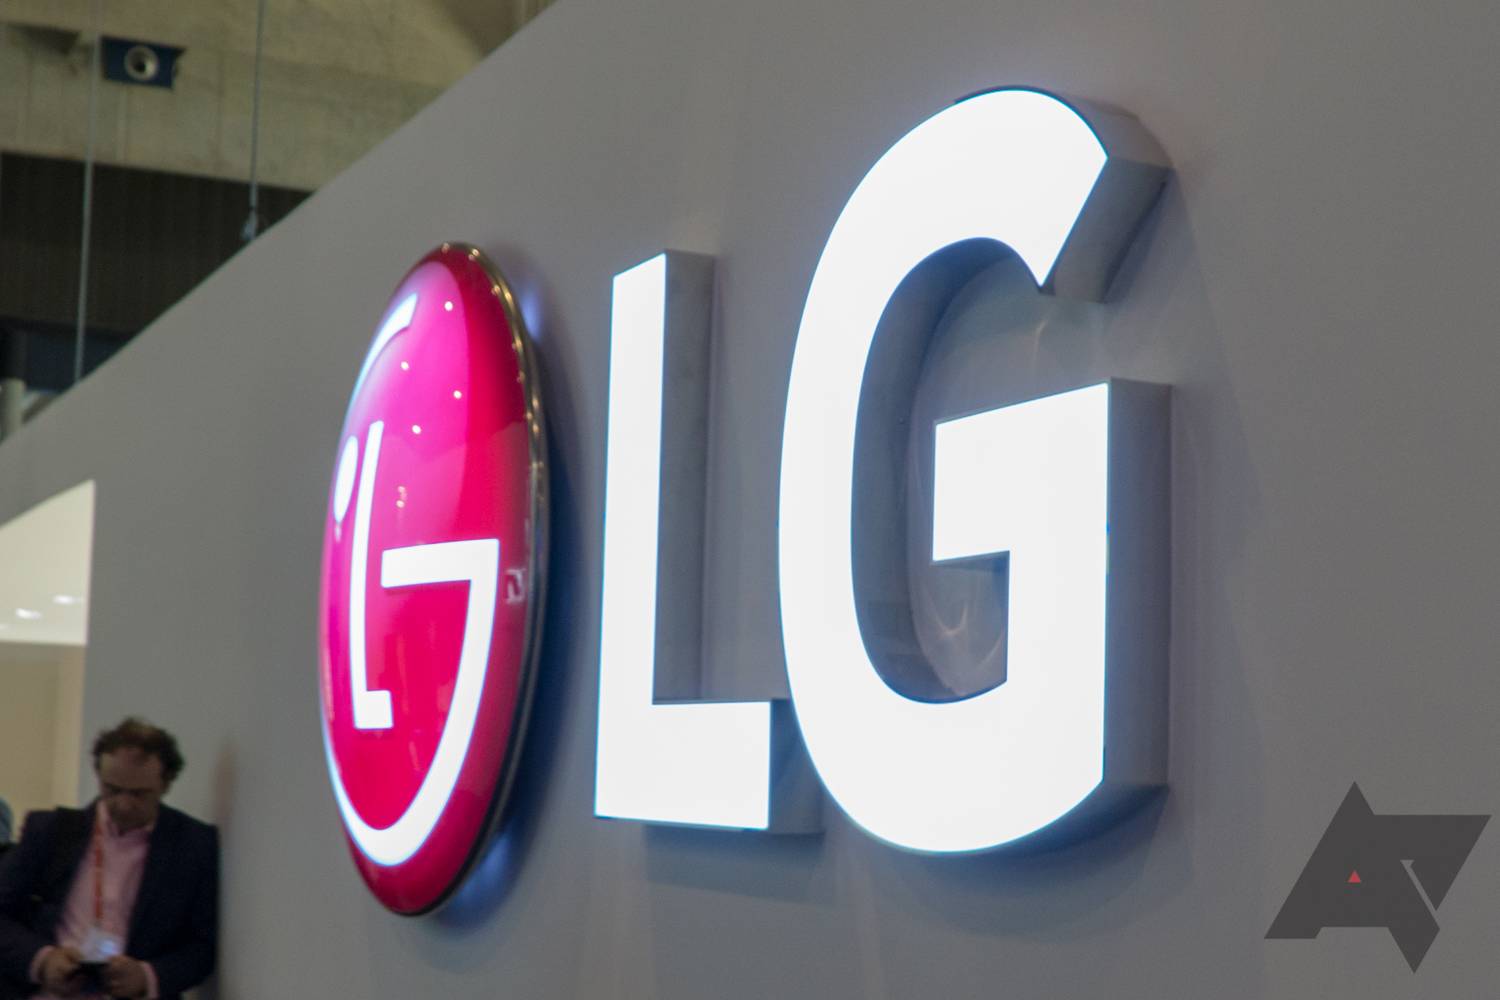 Many LG phones are unusable on T-Mobile due to ‘LG IMS’ issues, here’s a potential fix